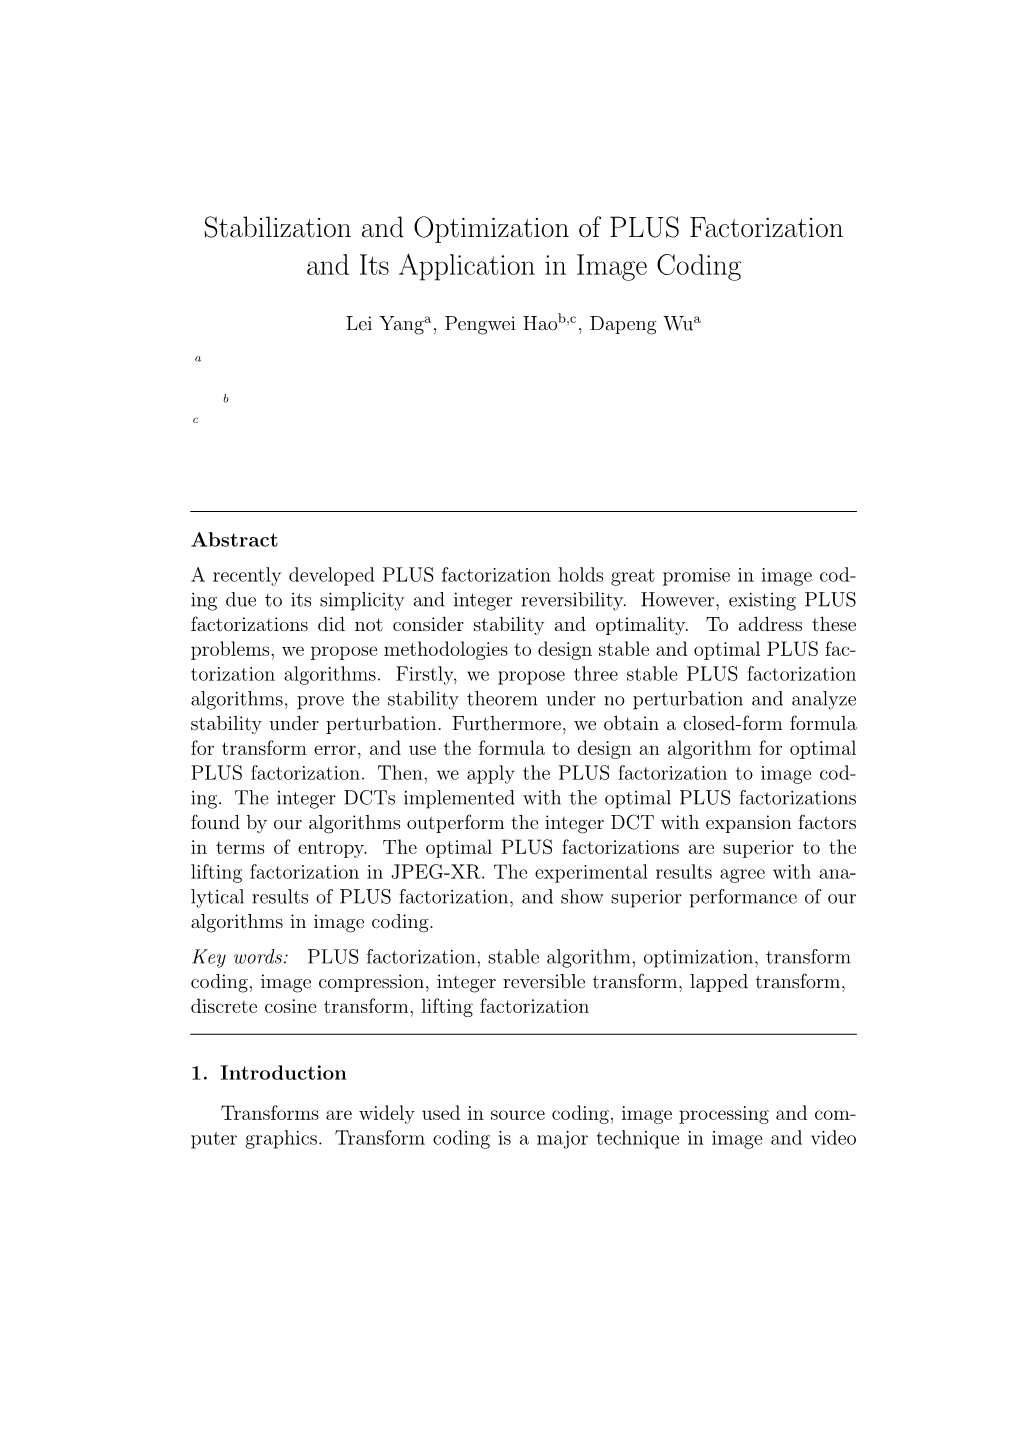 Stabilization and Optimization of PLUS Factorization and Its Application in Image Coding